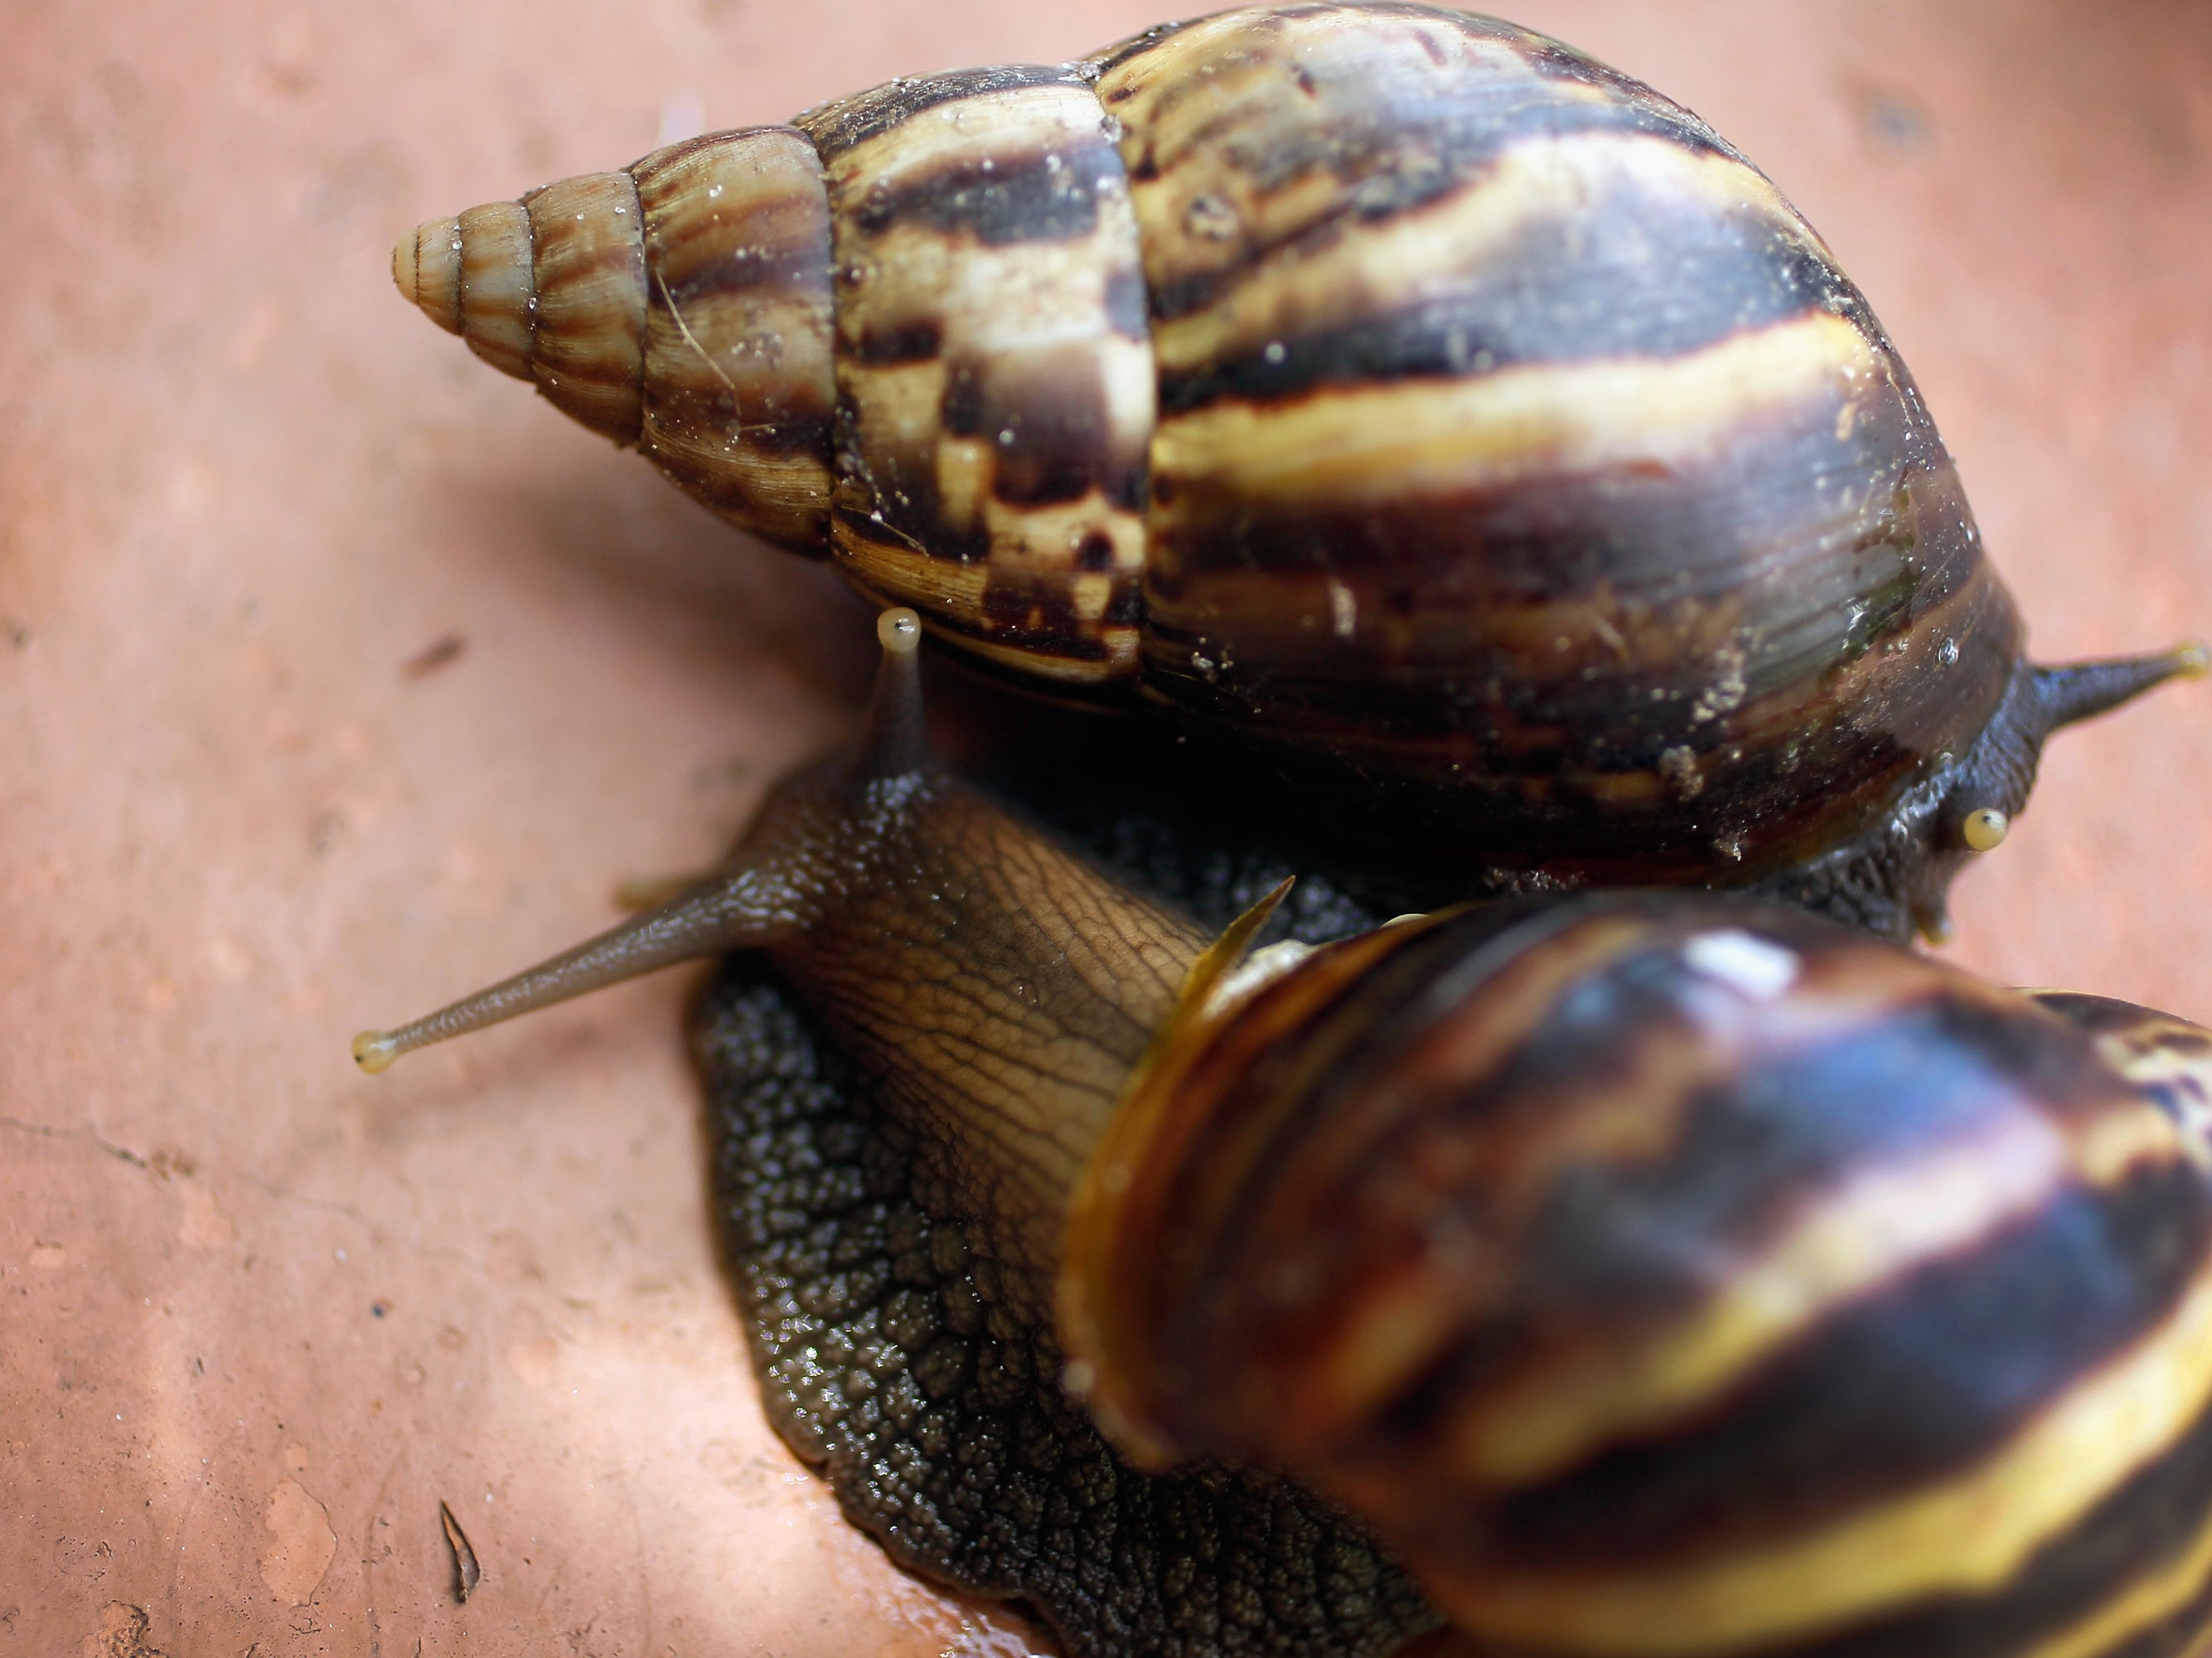 Giant African land snails